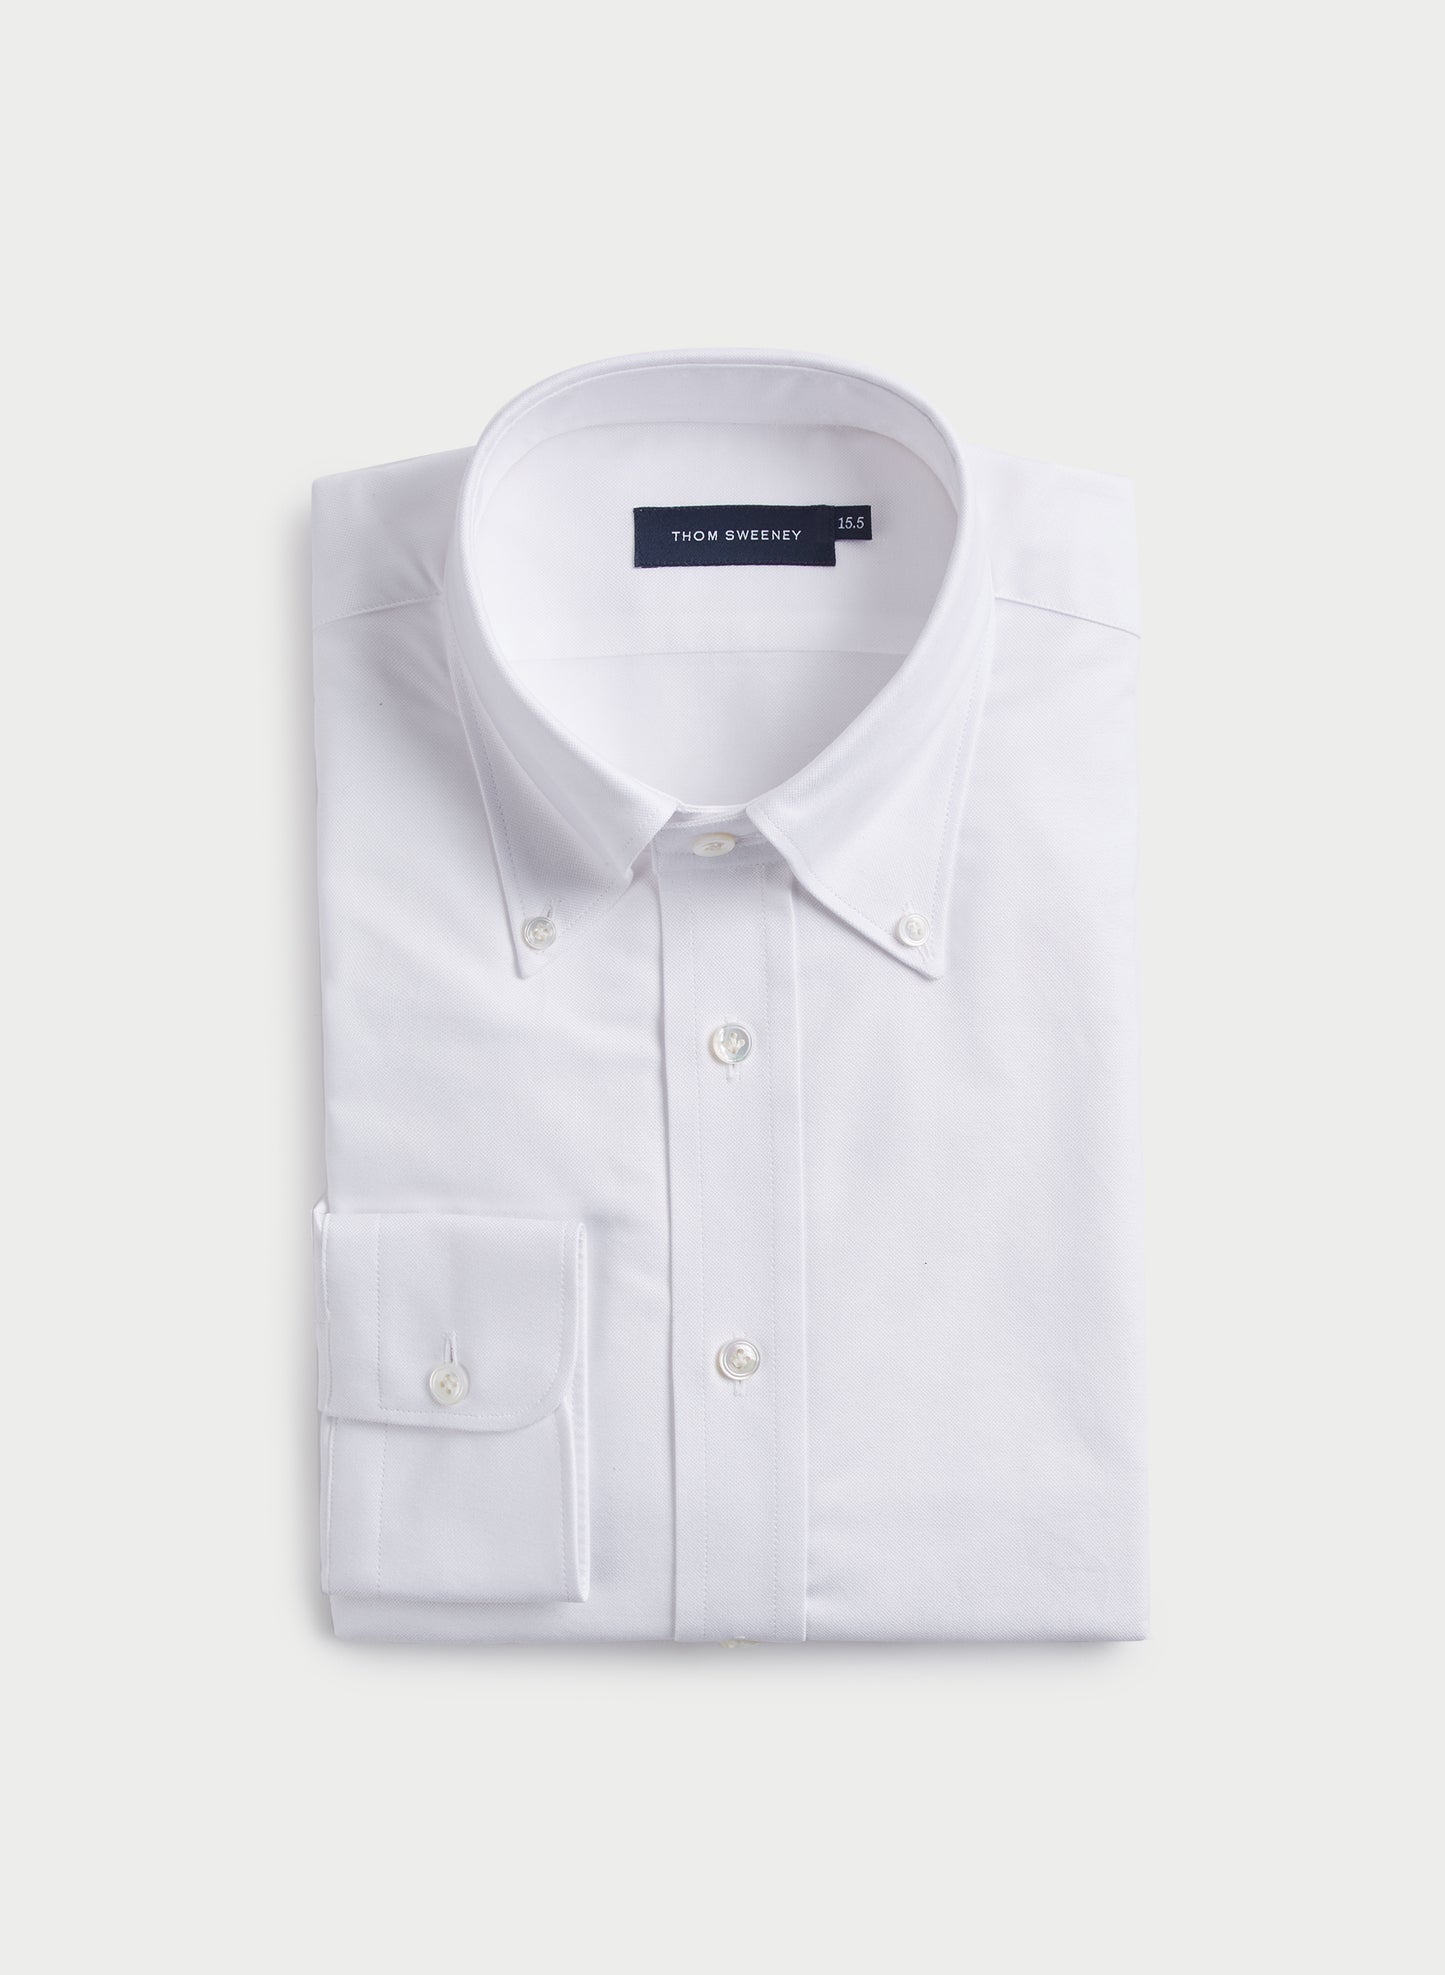 Casual Button Down Cotton Oxford Shirt Folded Product Image